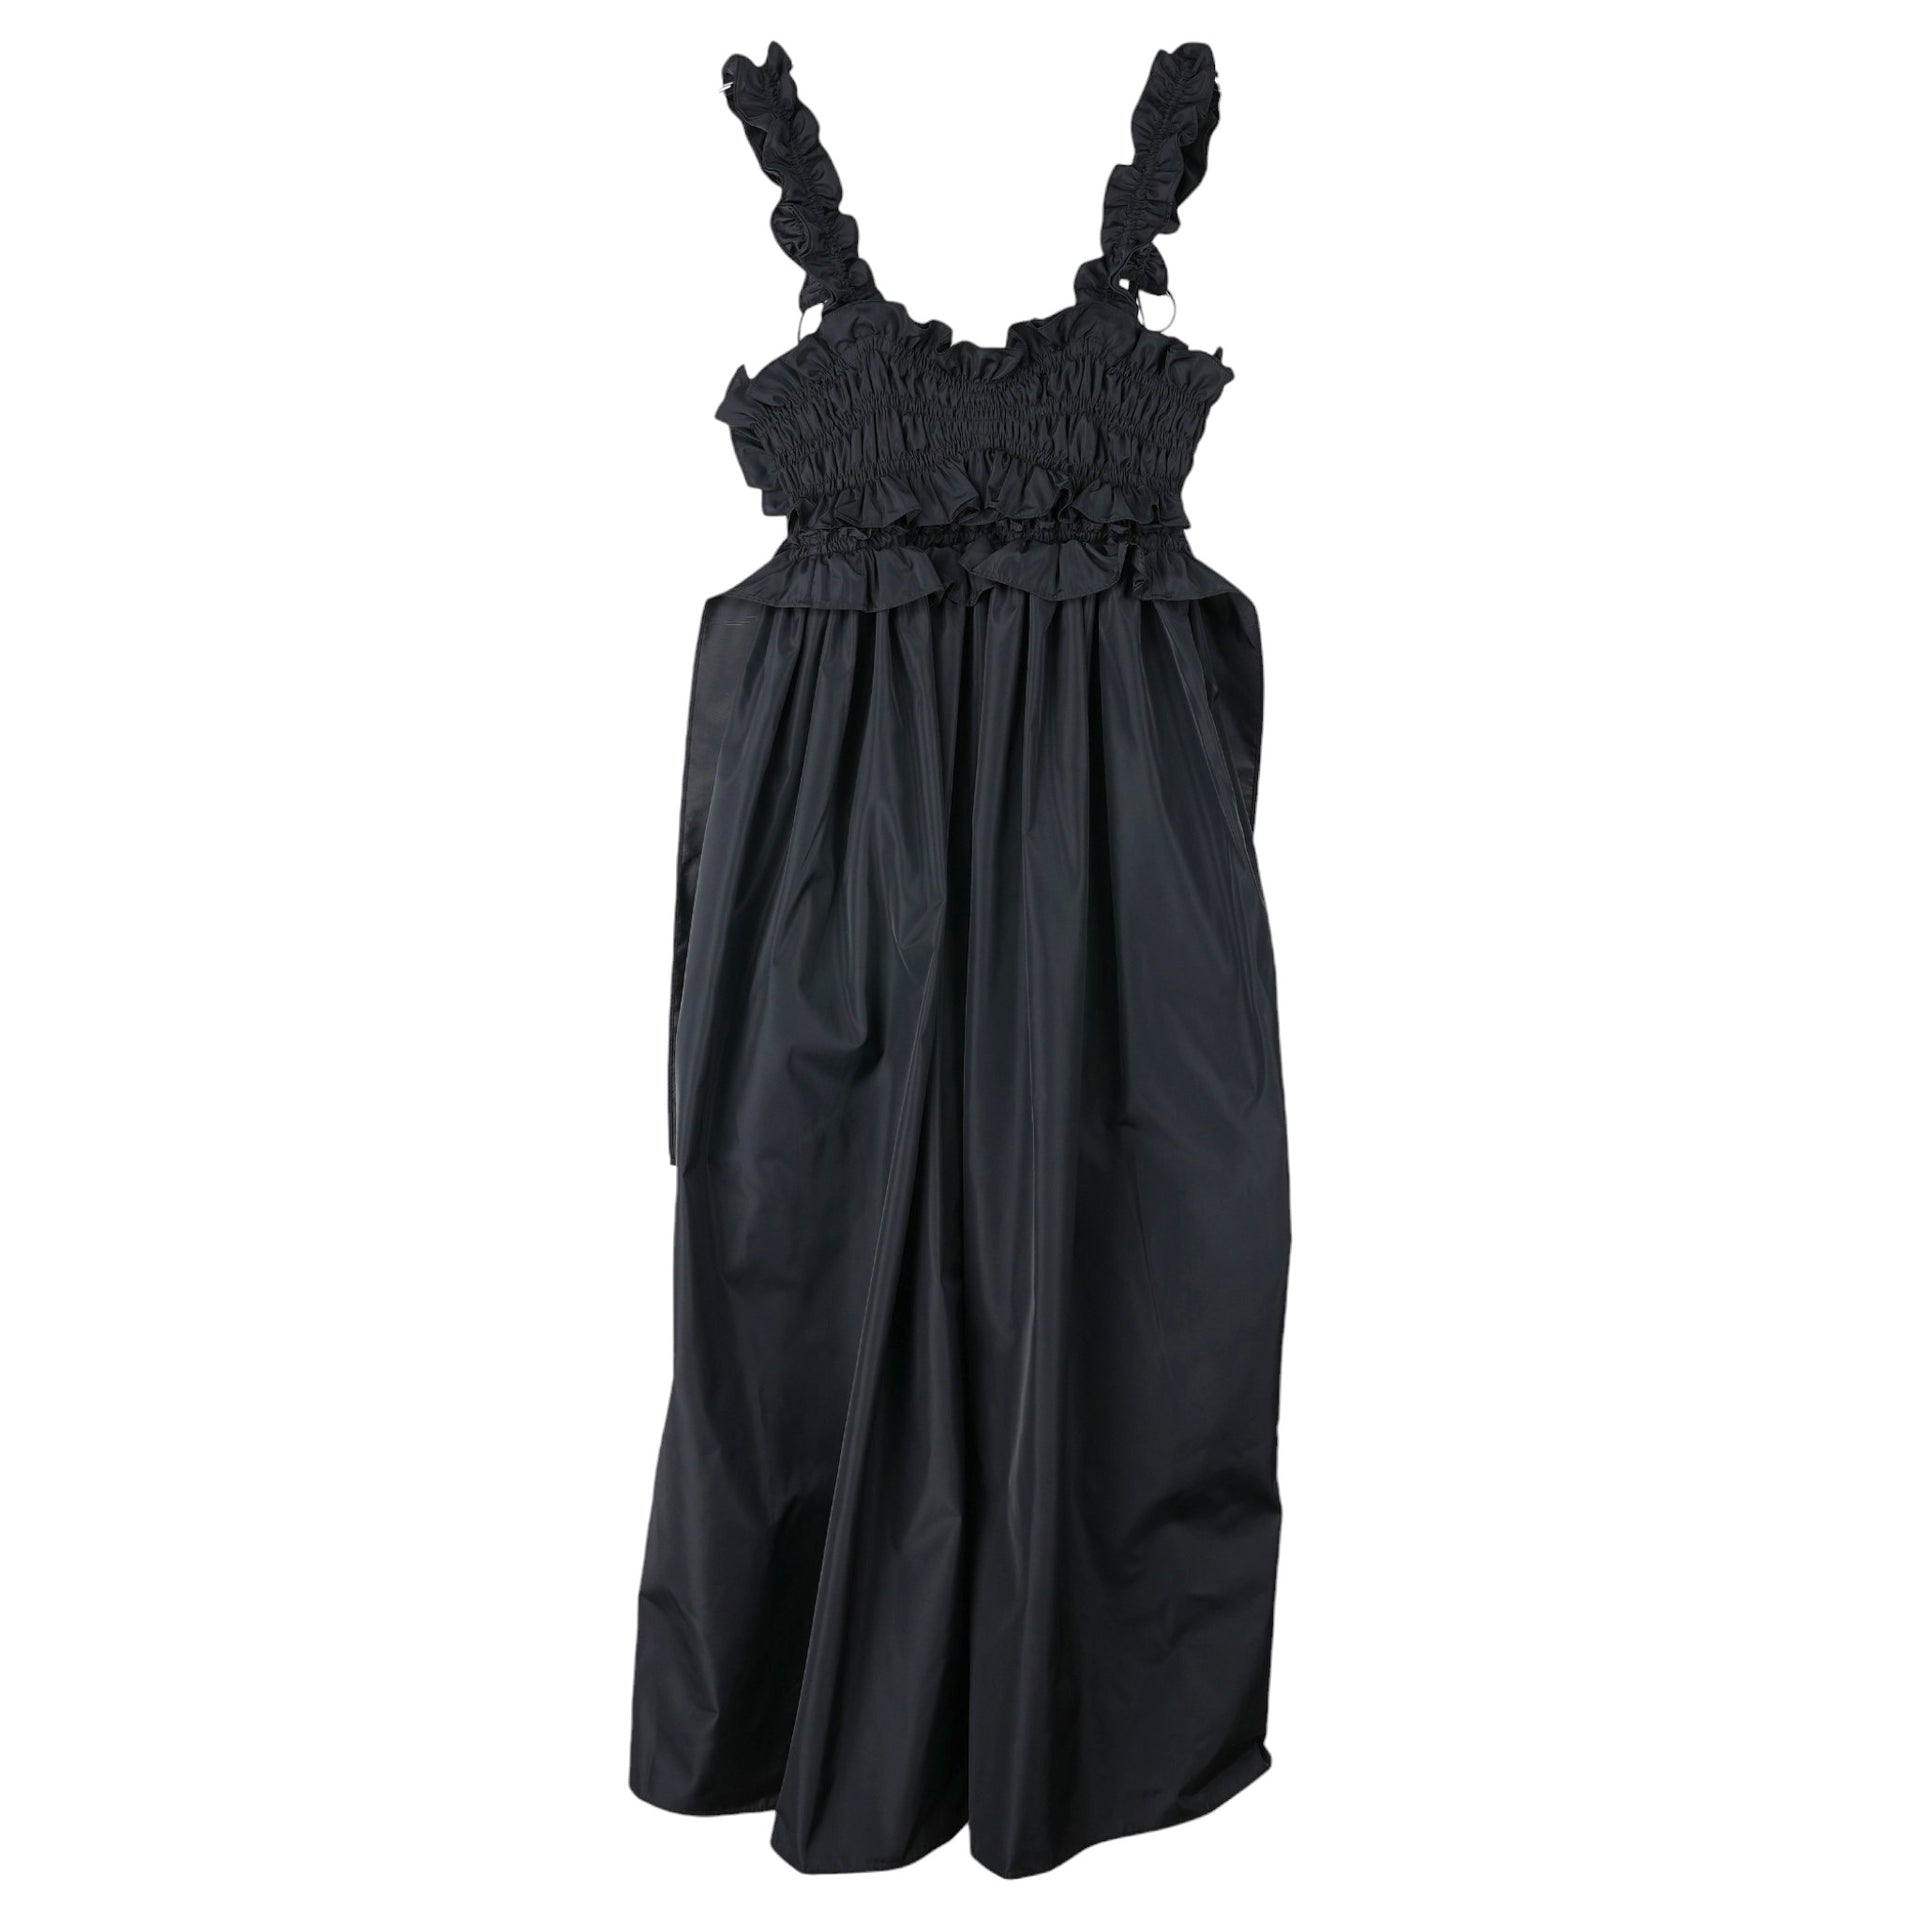 LONG STRAP DRESS WITH SMOCKED BODICE AND RUFFLES / BLACK